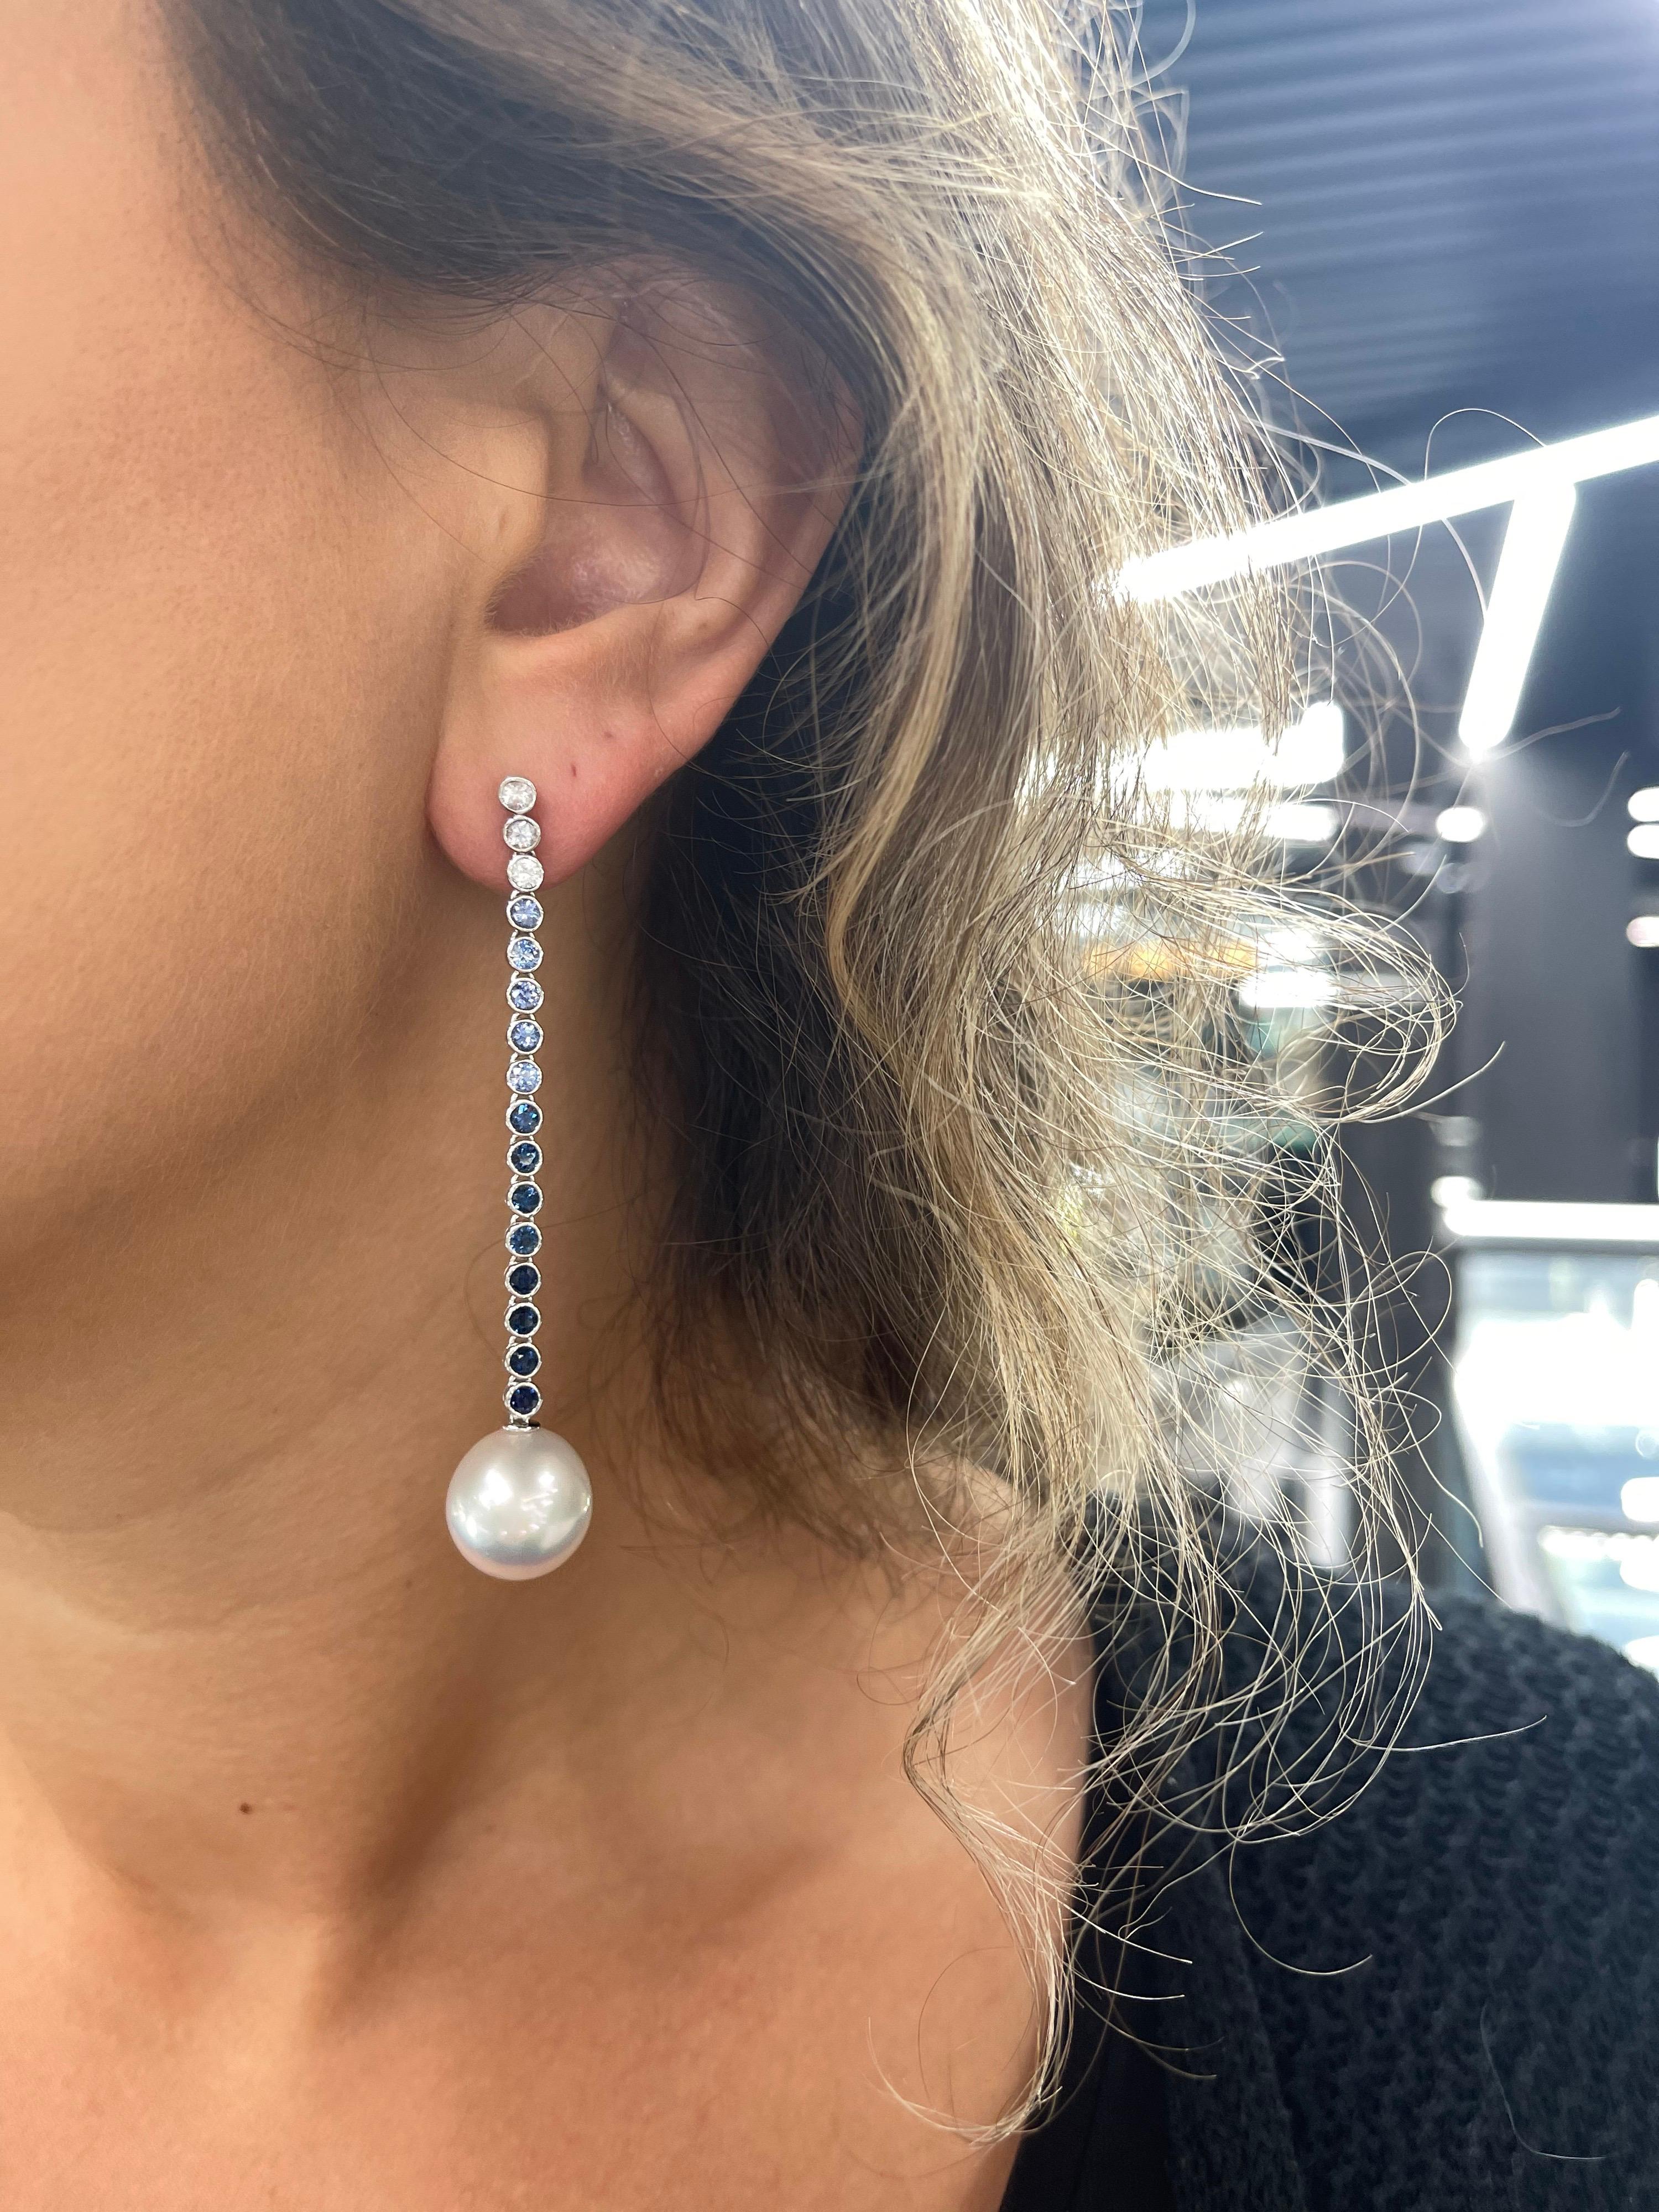 18 Karat white gold drop earrings featuring an ombree motif of white sapphires to blue sapphires and two white South Sea Pearls measuring 13-14 mm.
6 White Sapphires weighing 0.57 carats and 26 blue sapphires weighing 2.42 carats.